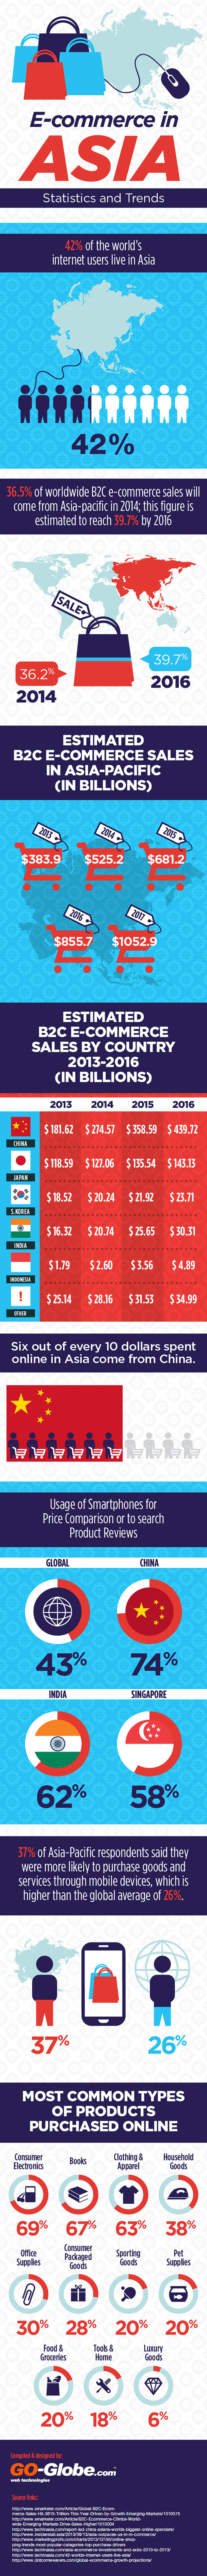 ecommerce-in-asia